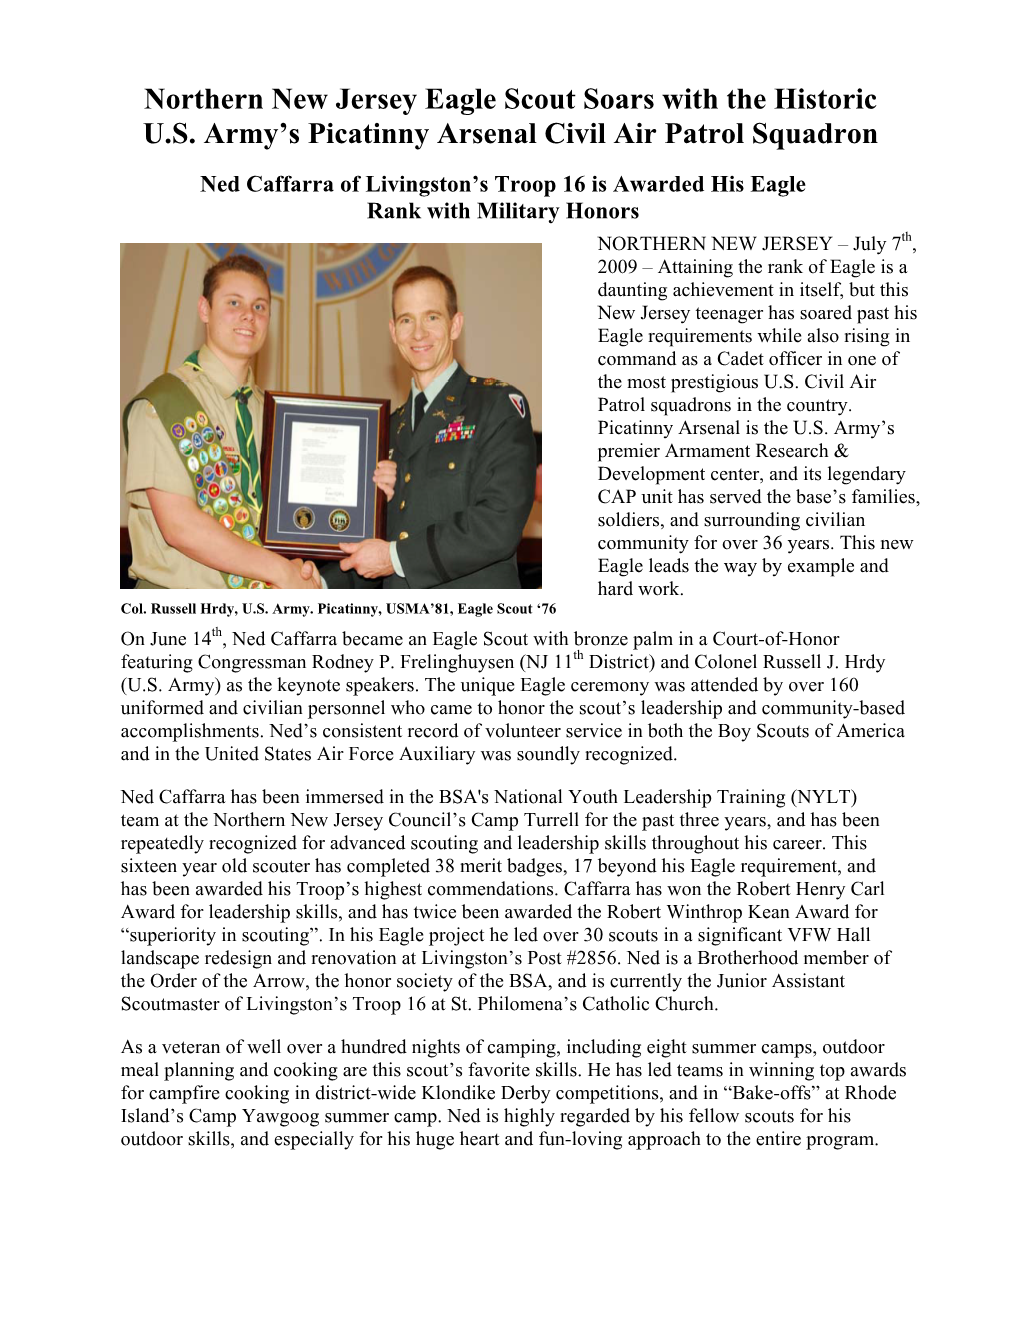 Northern New Jersey Eagle Scout Soars with the Historic U.S. Army's